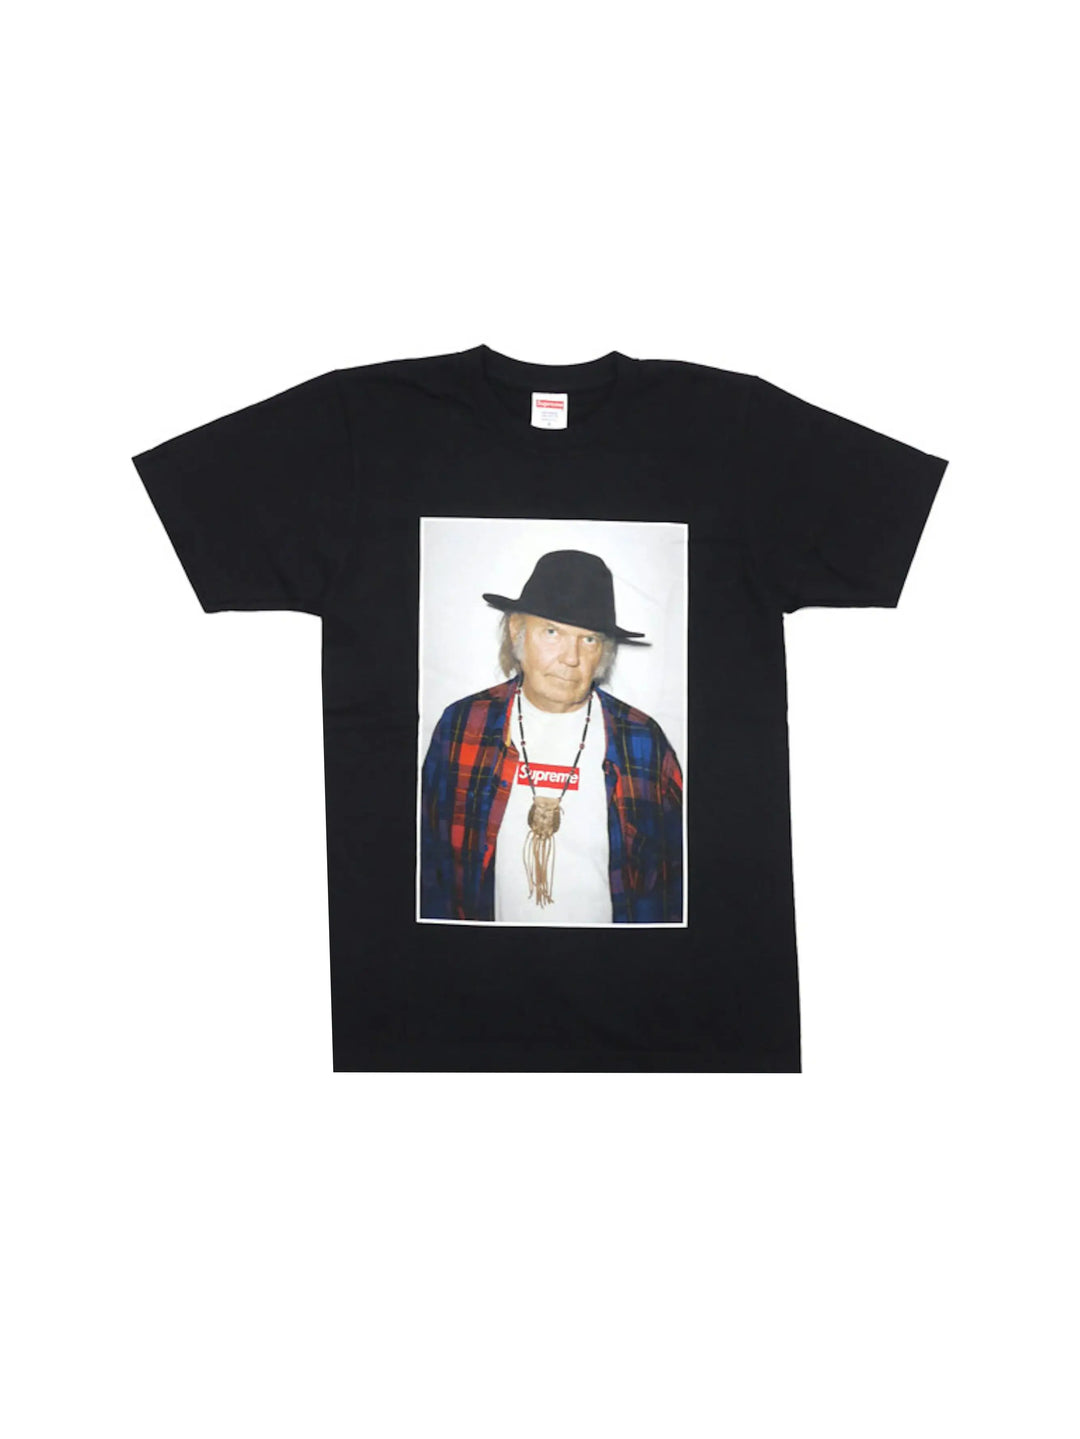 Supreme Neil Young Tee Black in Auckland, New Zealand - Shop name